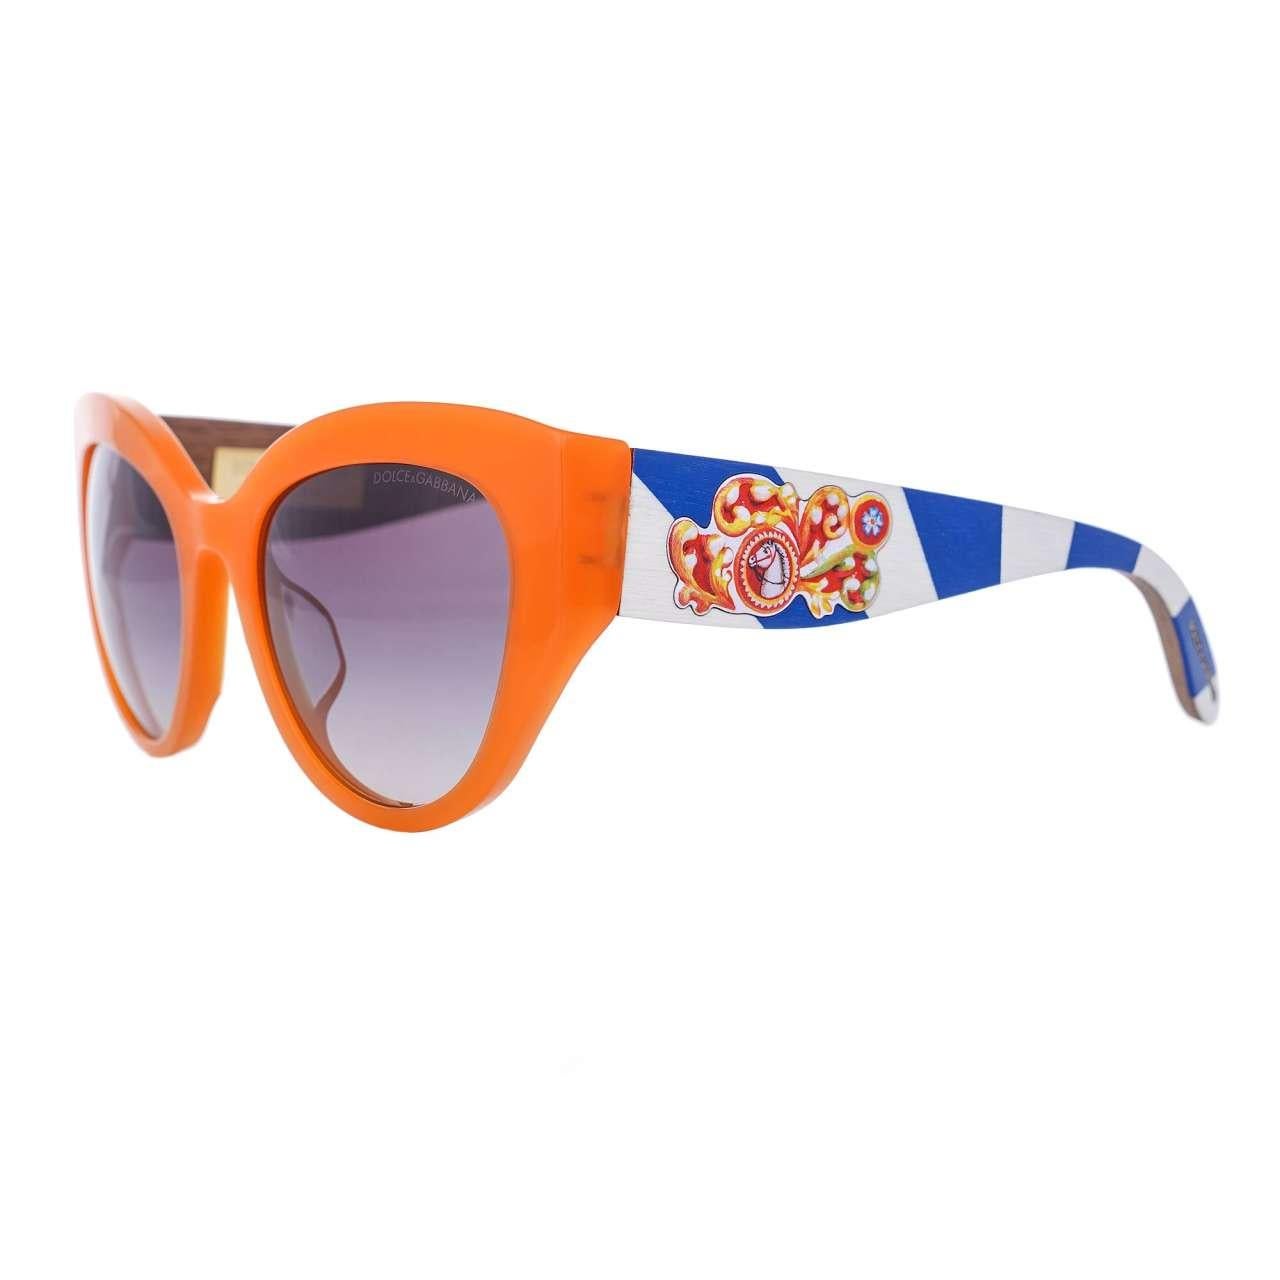 - Cat Eye Sunglasses DG 4278 with Carretto pattern and wood elements in orange, blue and white by DOLCE & GABBANA - MADE IN ITALY - New with Case - Model: DG 4278 - Color Frame: Orange / Blue / White - Color Lense: Faded brown - Material Frame: 50%